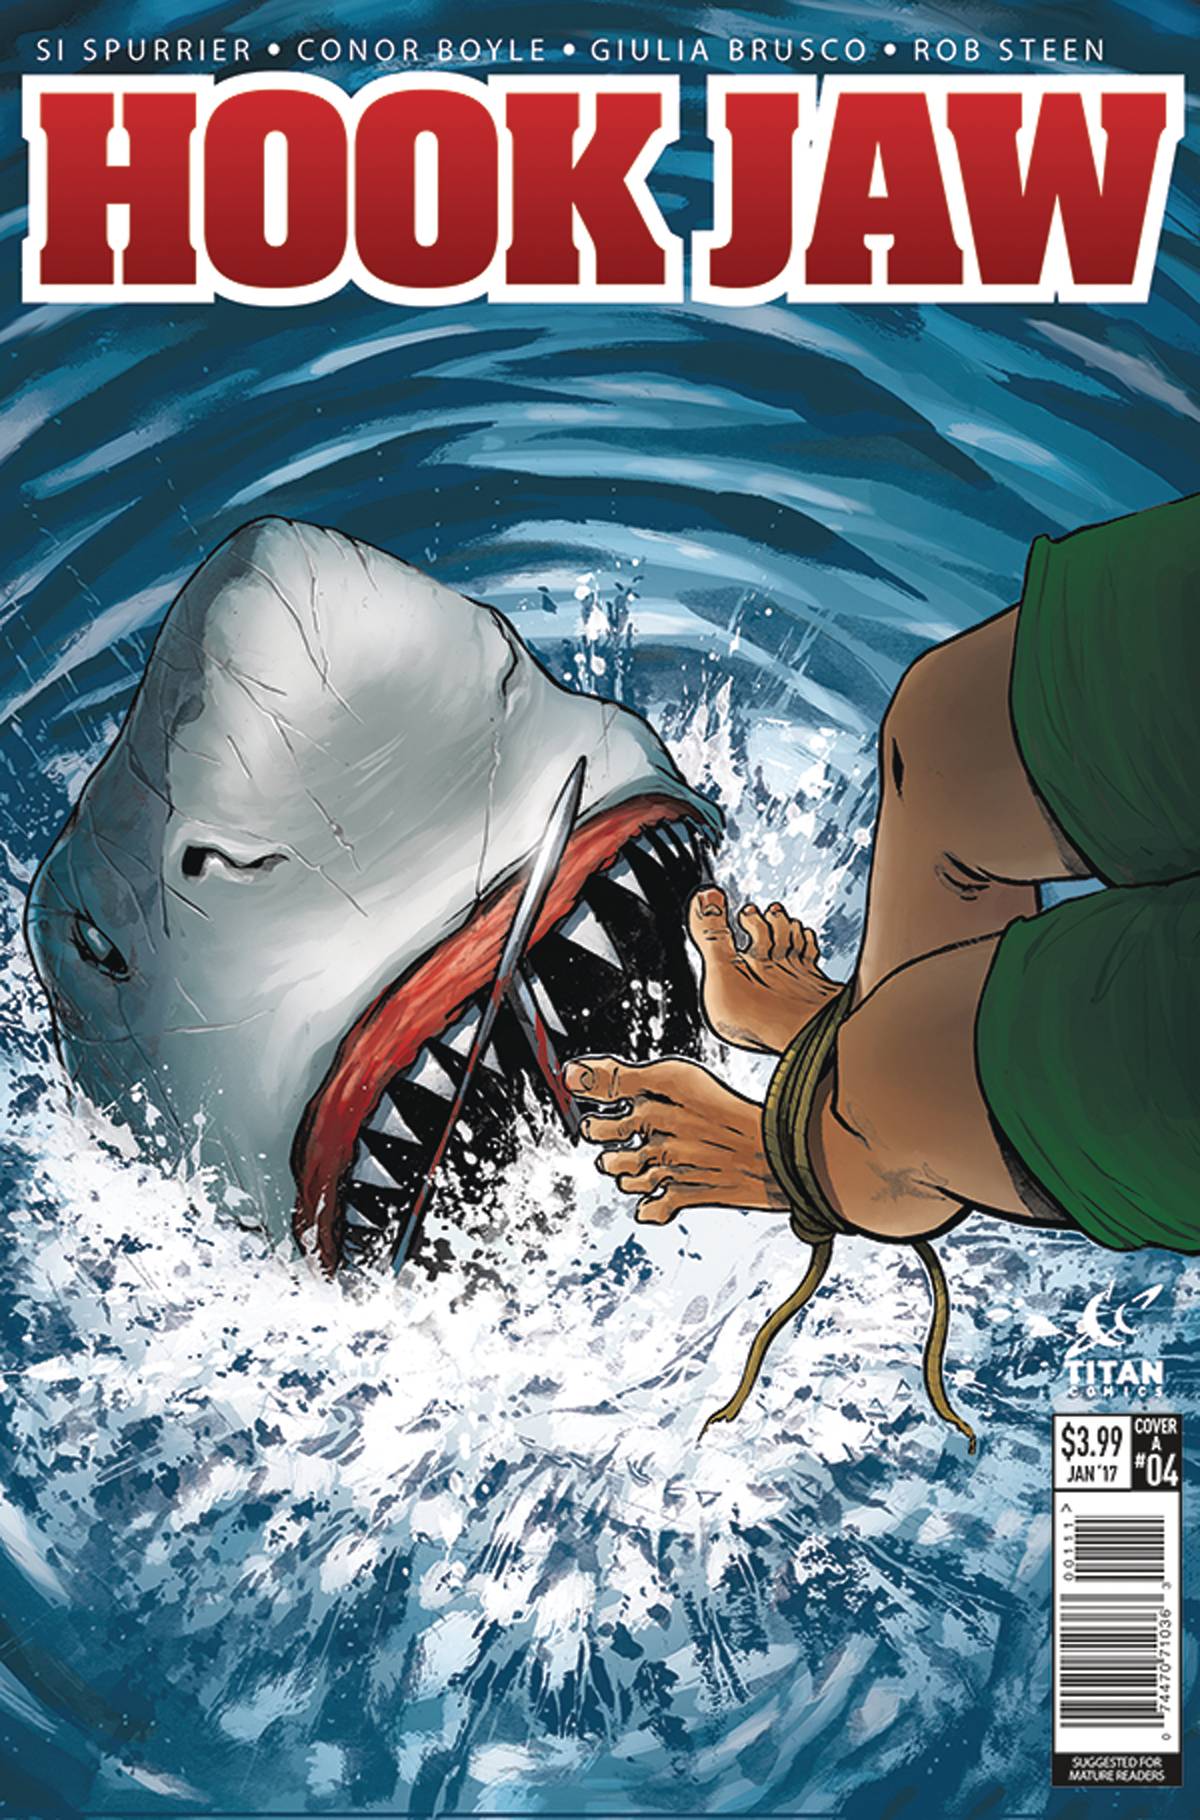 Hookjaw #4 Cover A Boyle